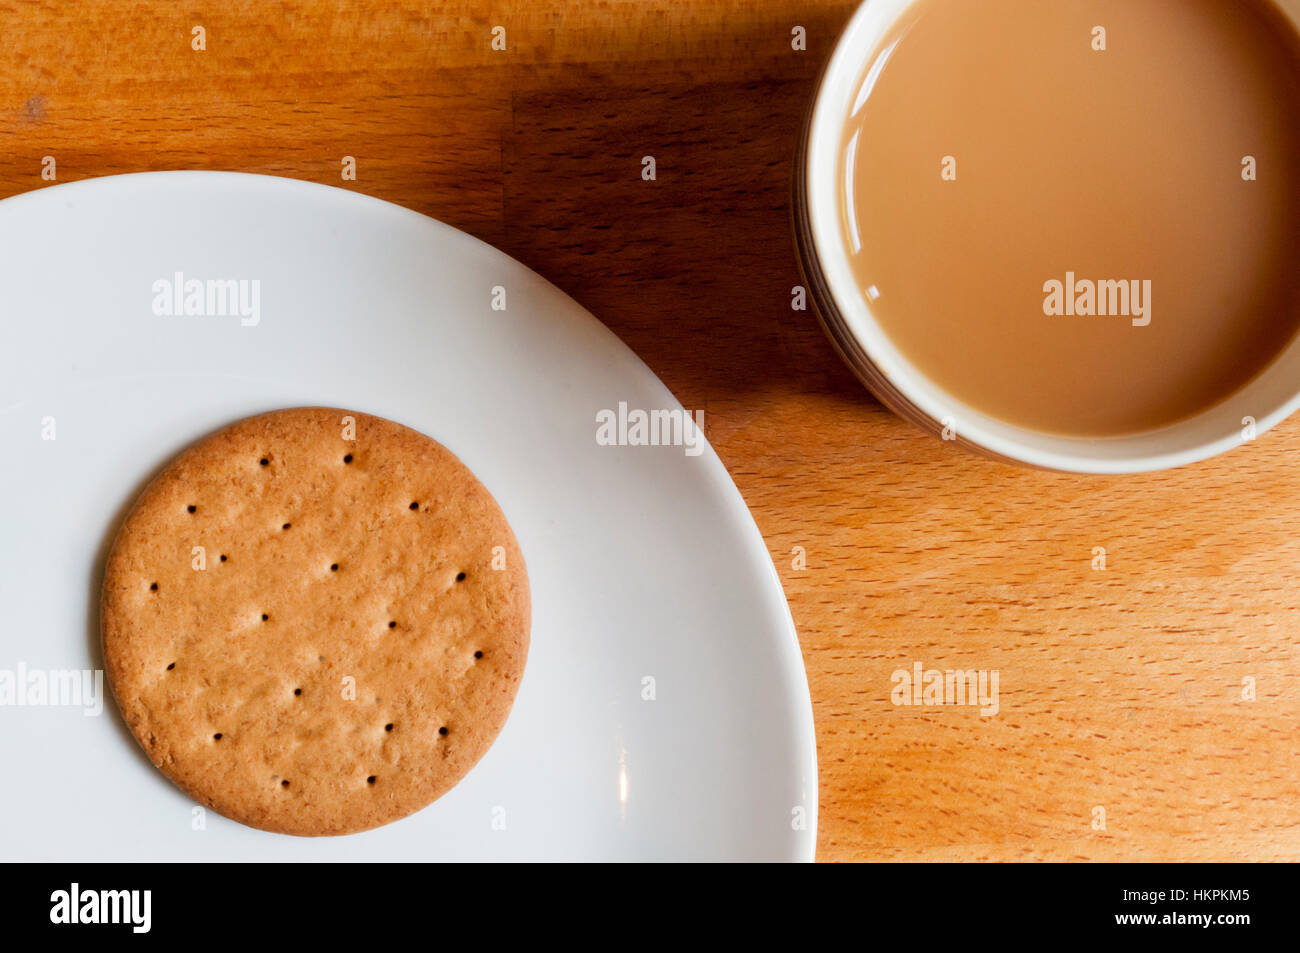 A mug of tea and a digestive biscuit. Stock Photo